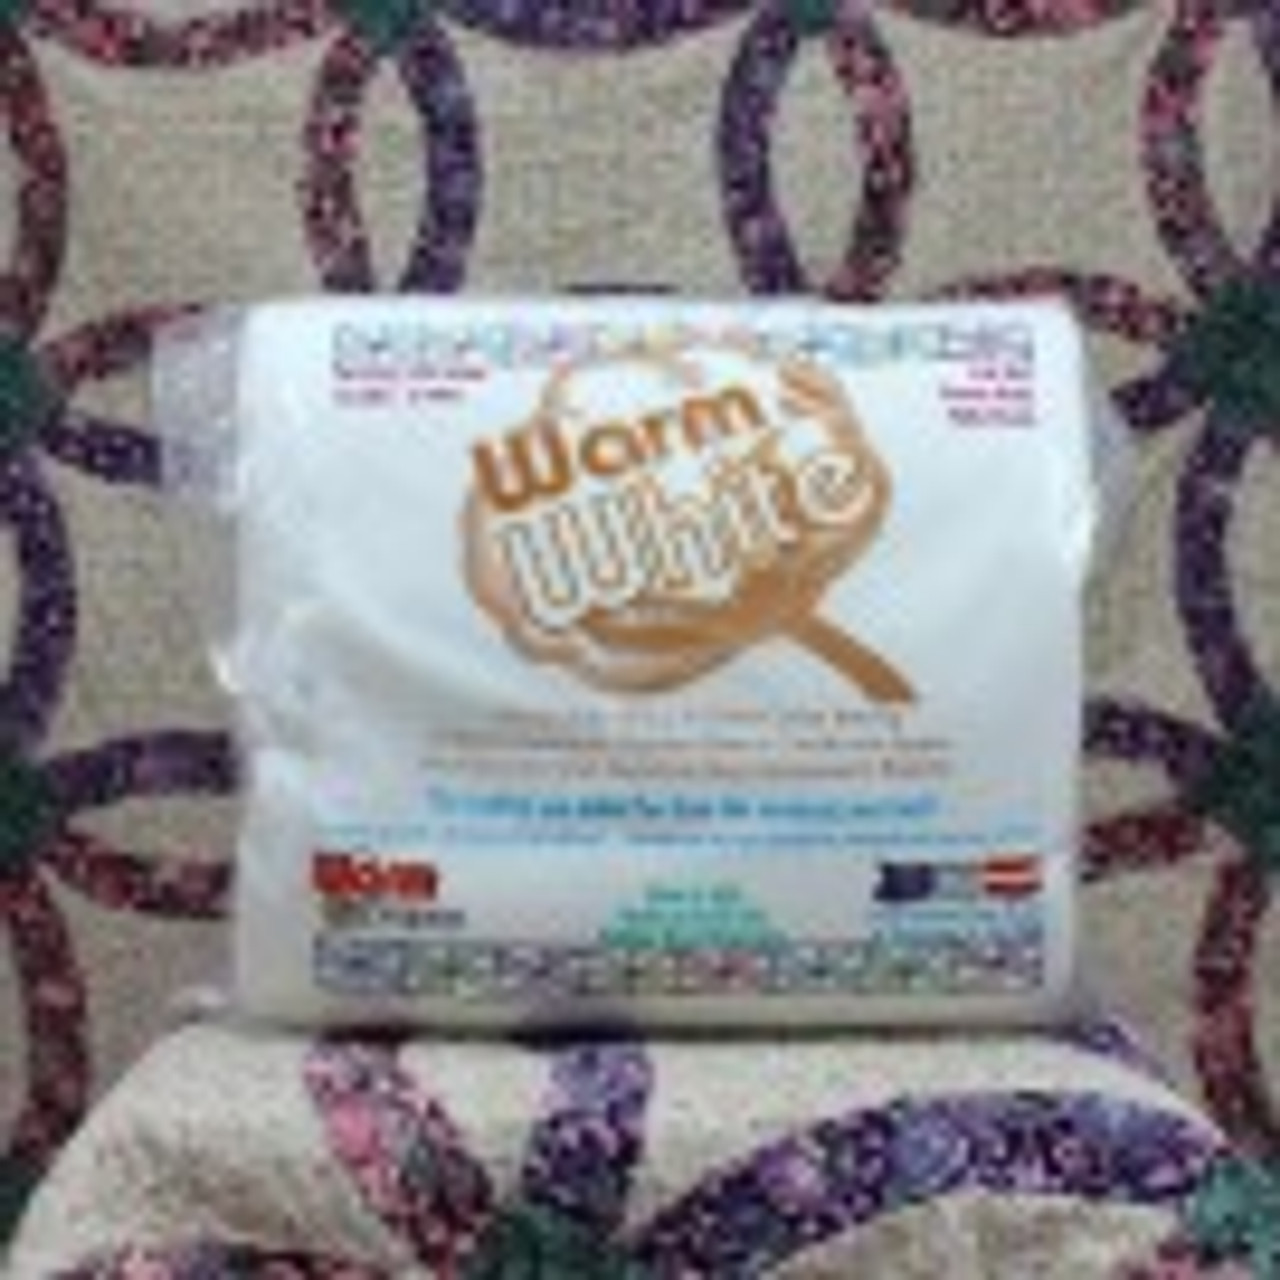 The Warm Company Warm And Natural Cotton Needled Batting 90x96